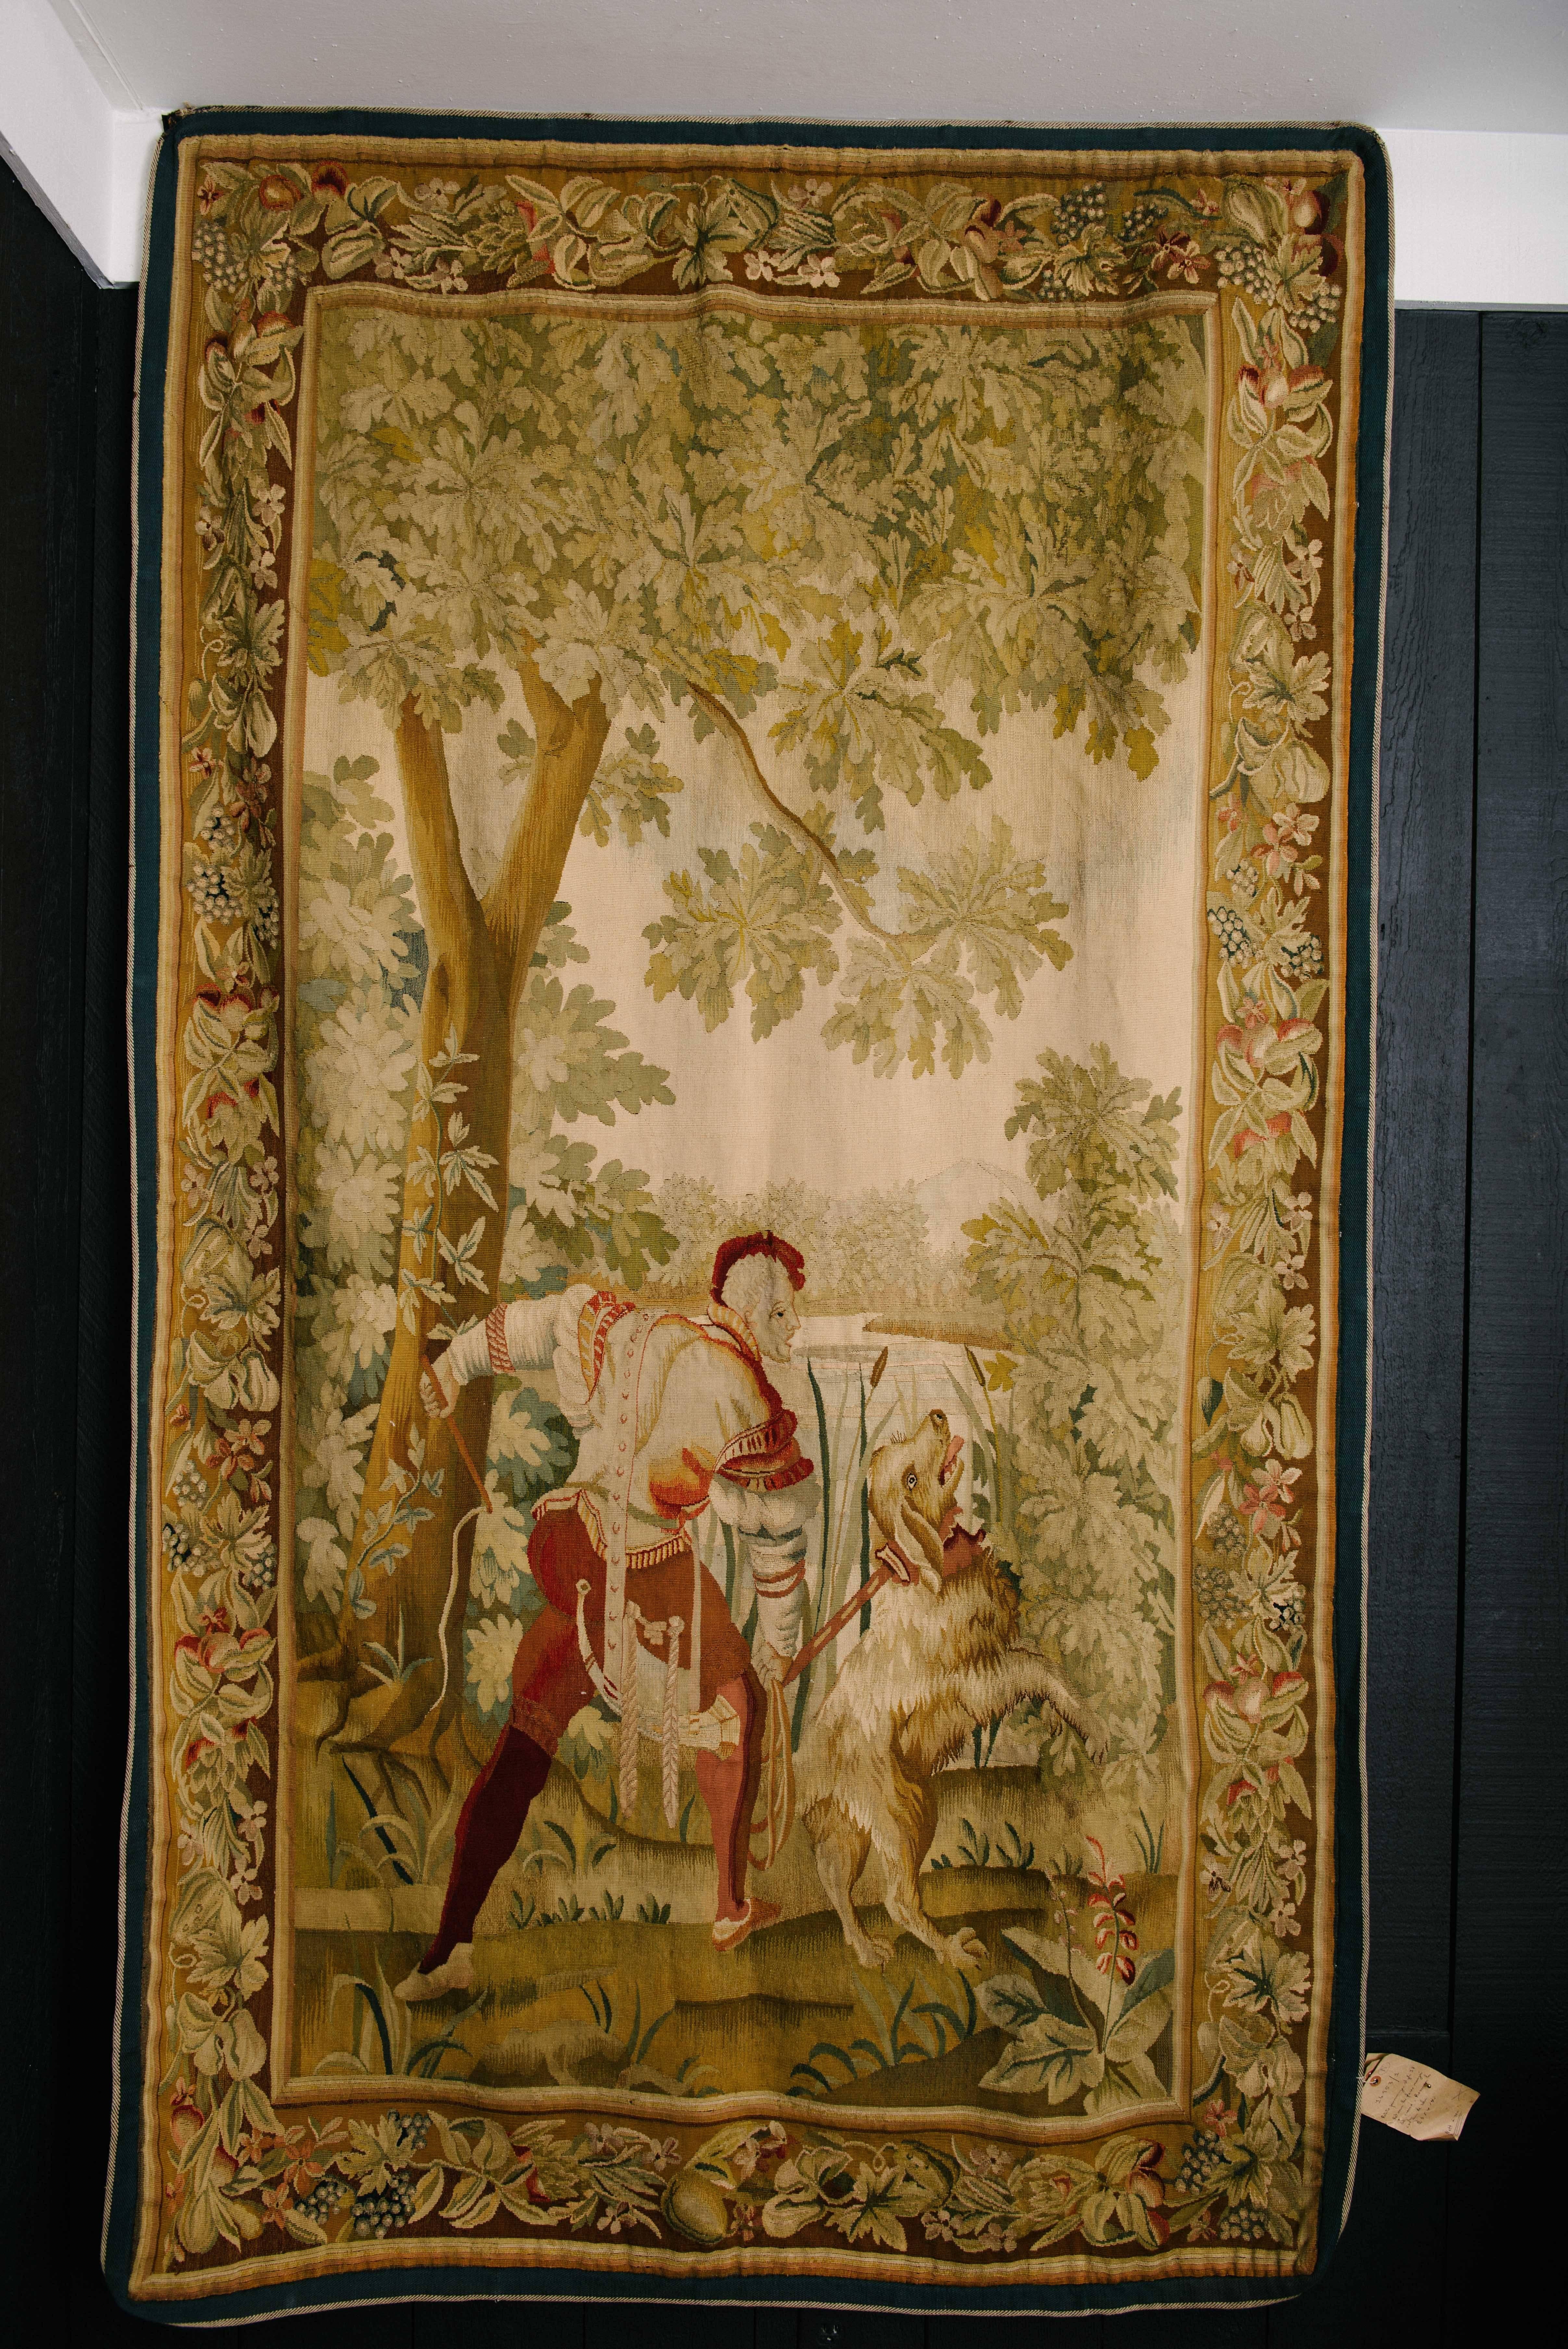 Rare pair of early 19th century French Louis Philippe Aubusson tapestries each depicting a figure, a dog and beautiful foliage.

Please click KIRBY ANTIQUES logo below to view additional pieces from our vast inventory.
 